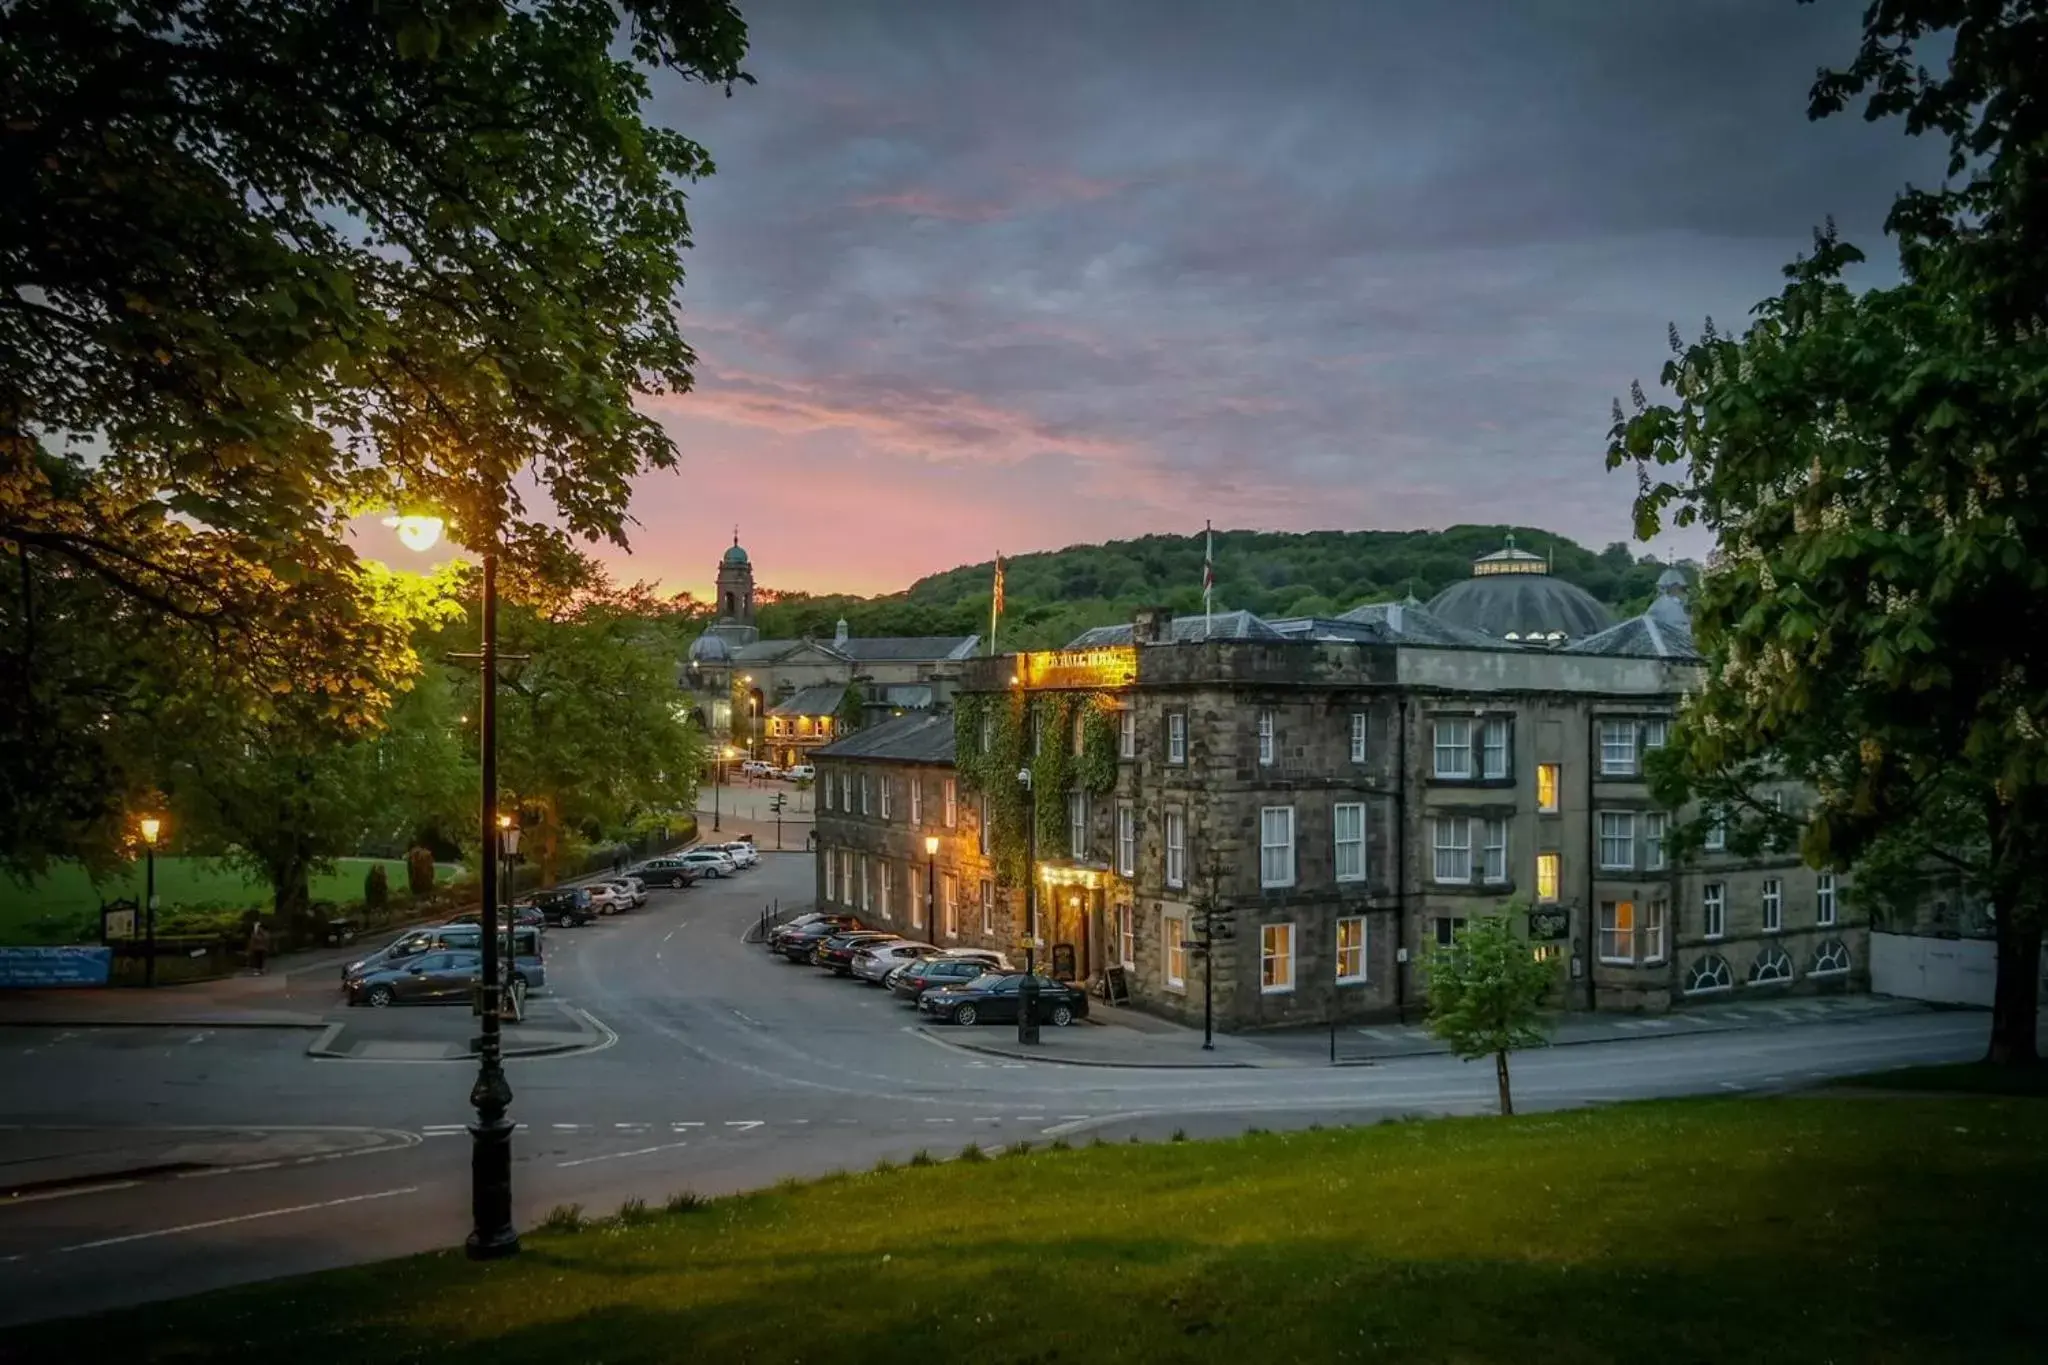 Sunset in Old Hall Hotel